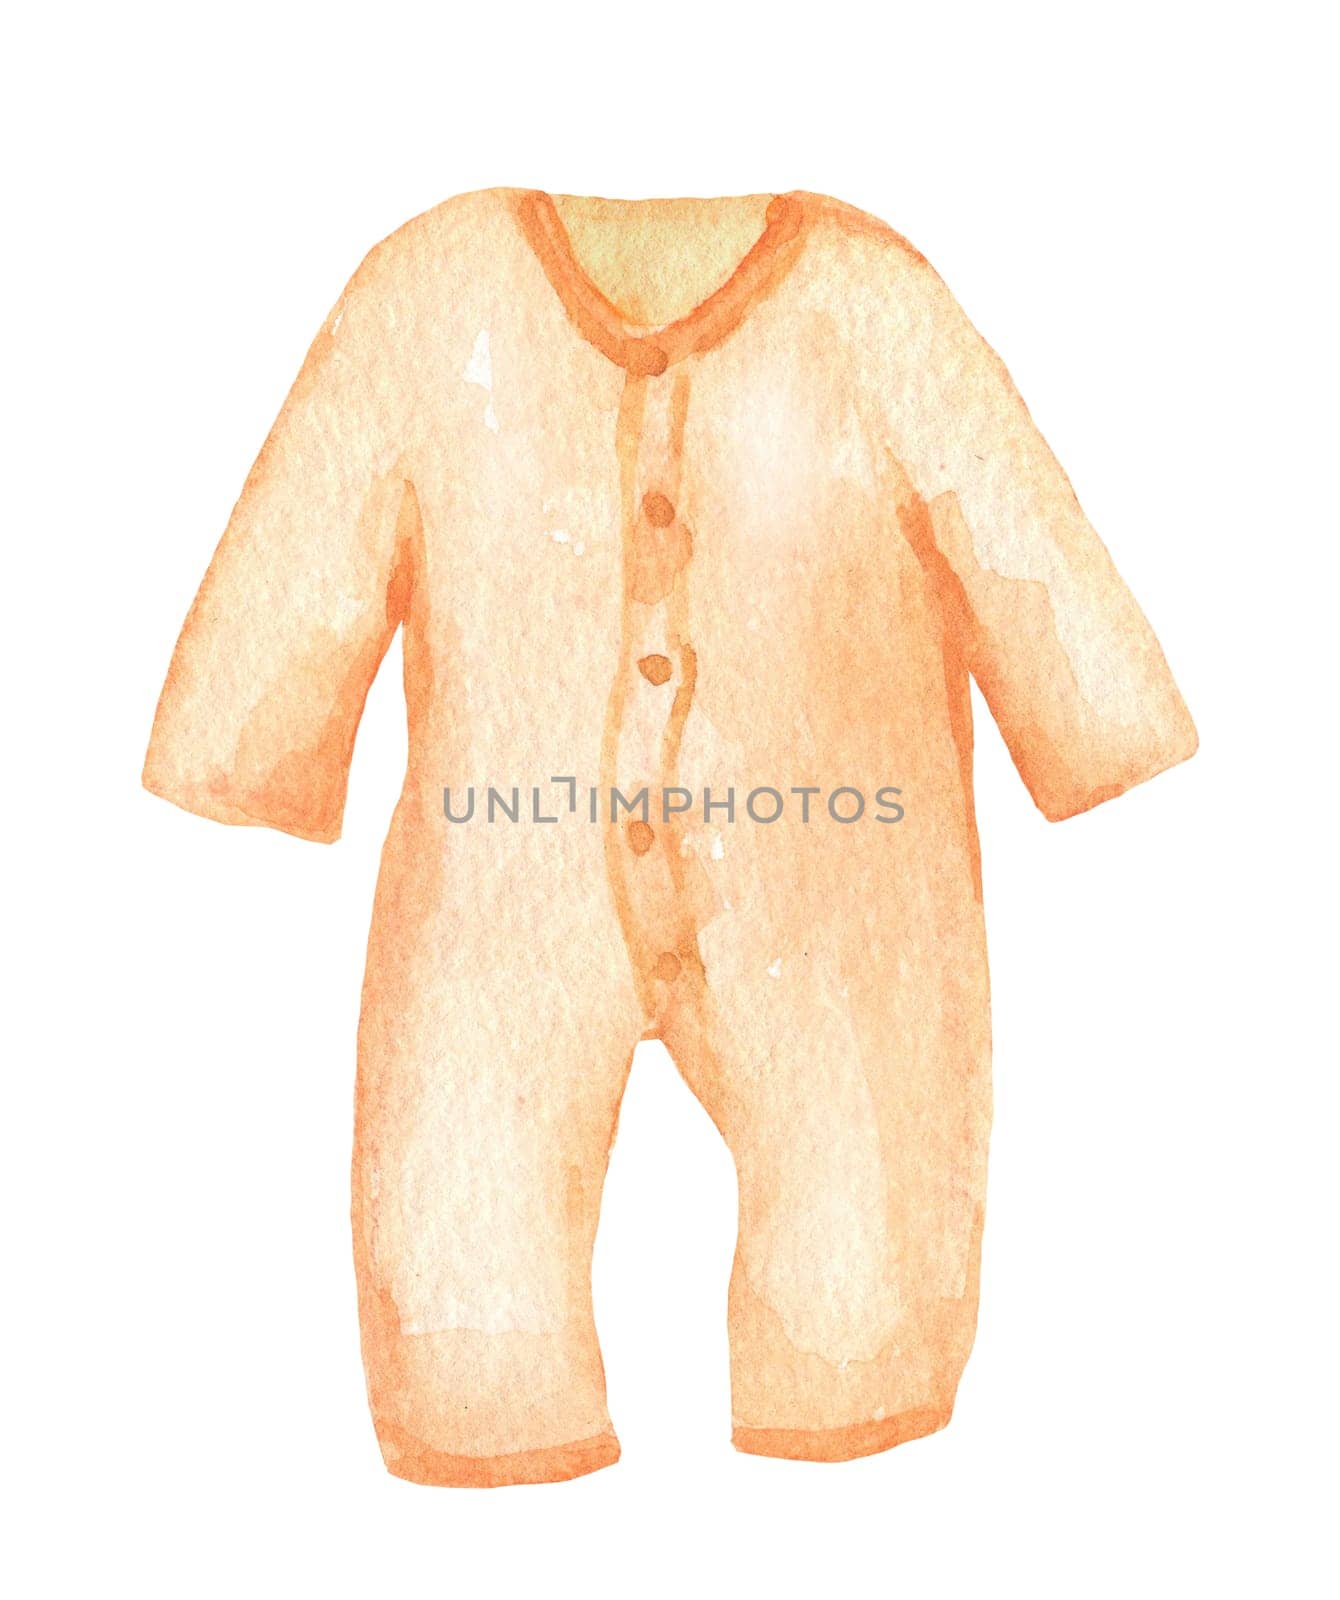 Infant cute bodysuit illustration. Watercolor sketch Baby clothes isolated on white by ElenaPlatova